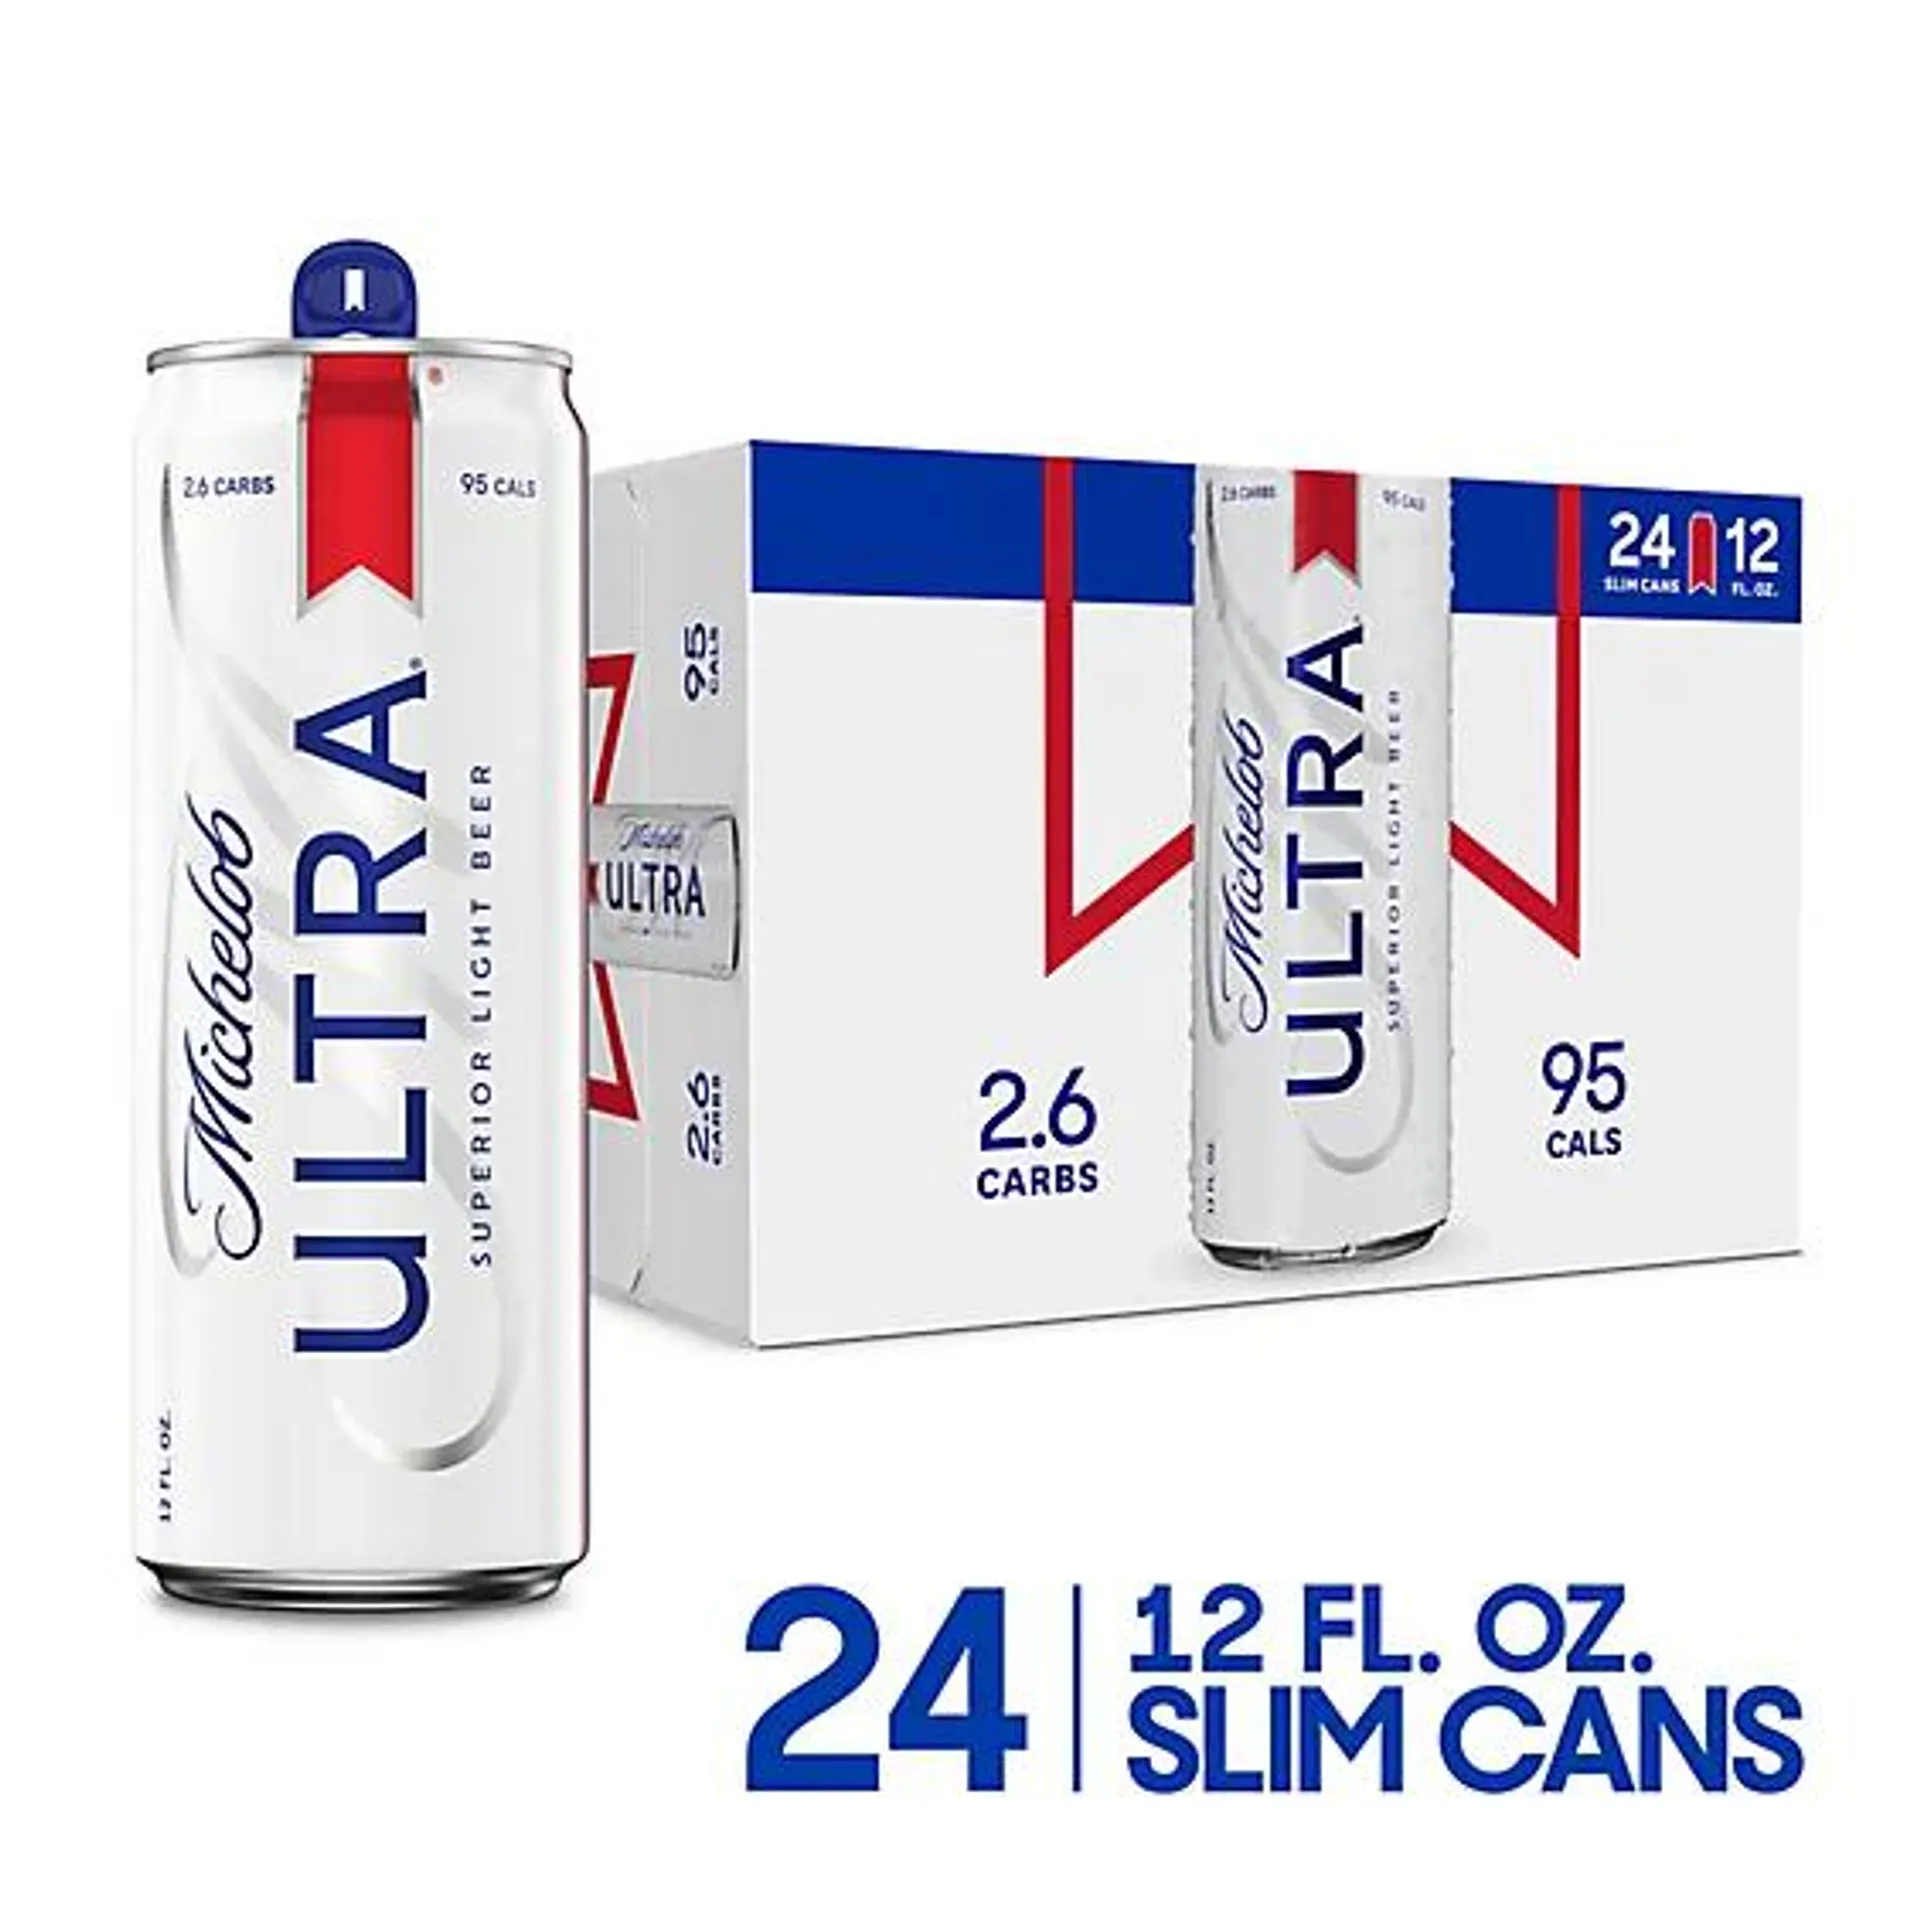 Michelob Ultra Light Beer Cans - 24-12 Fl. Oz.